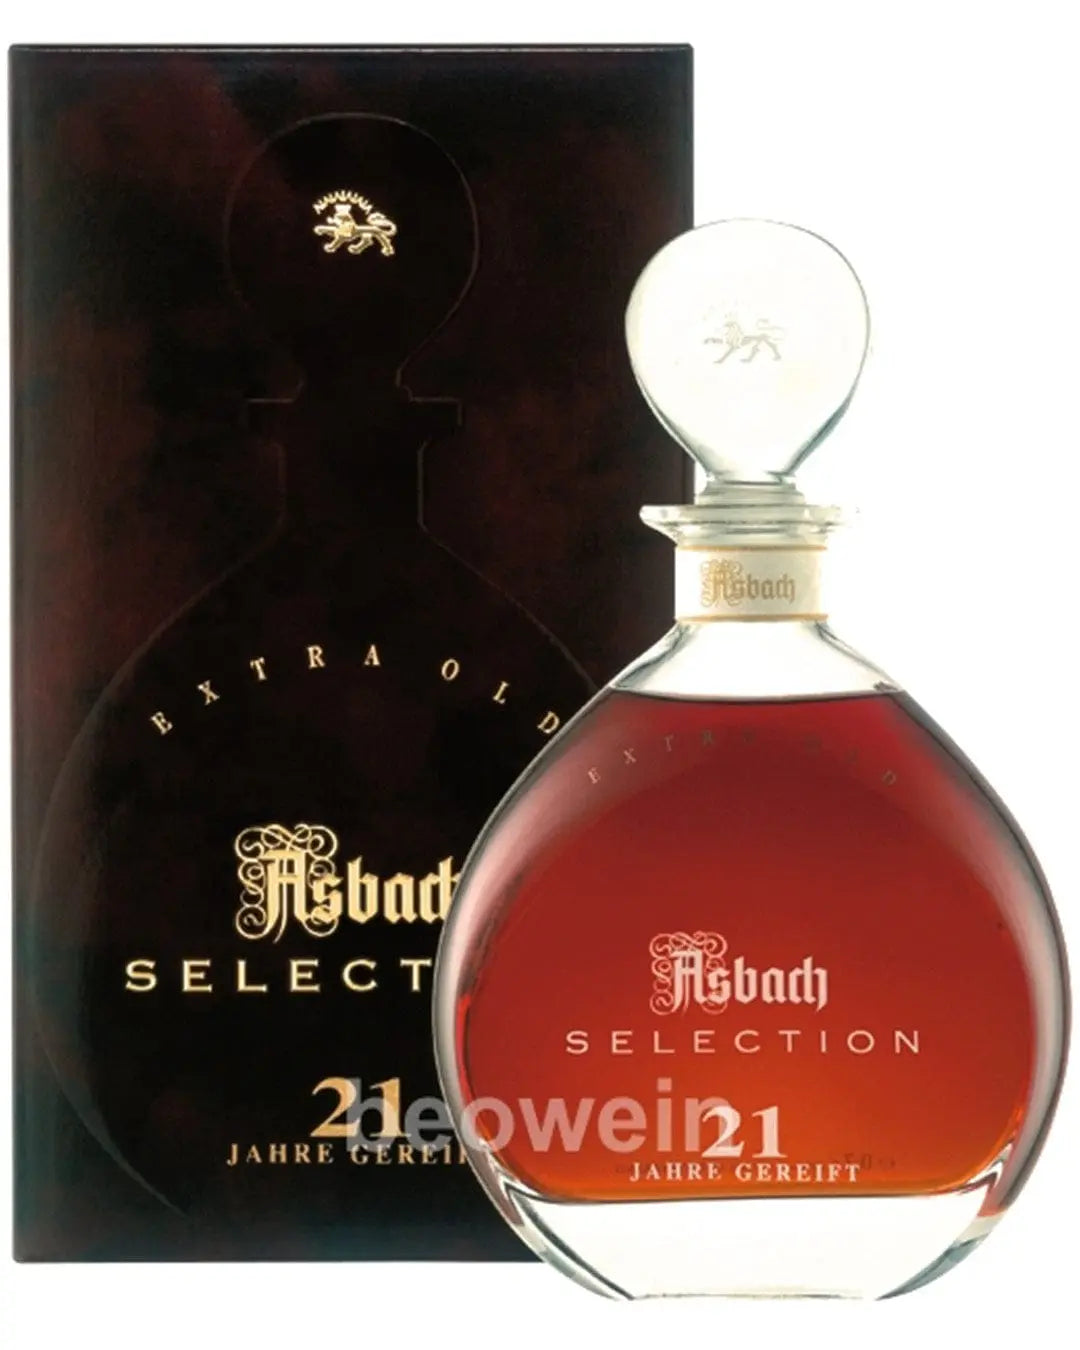 Asbach selelction 21 year old, 70 cl Cognac & Brandy 4016500013309